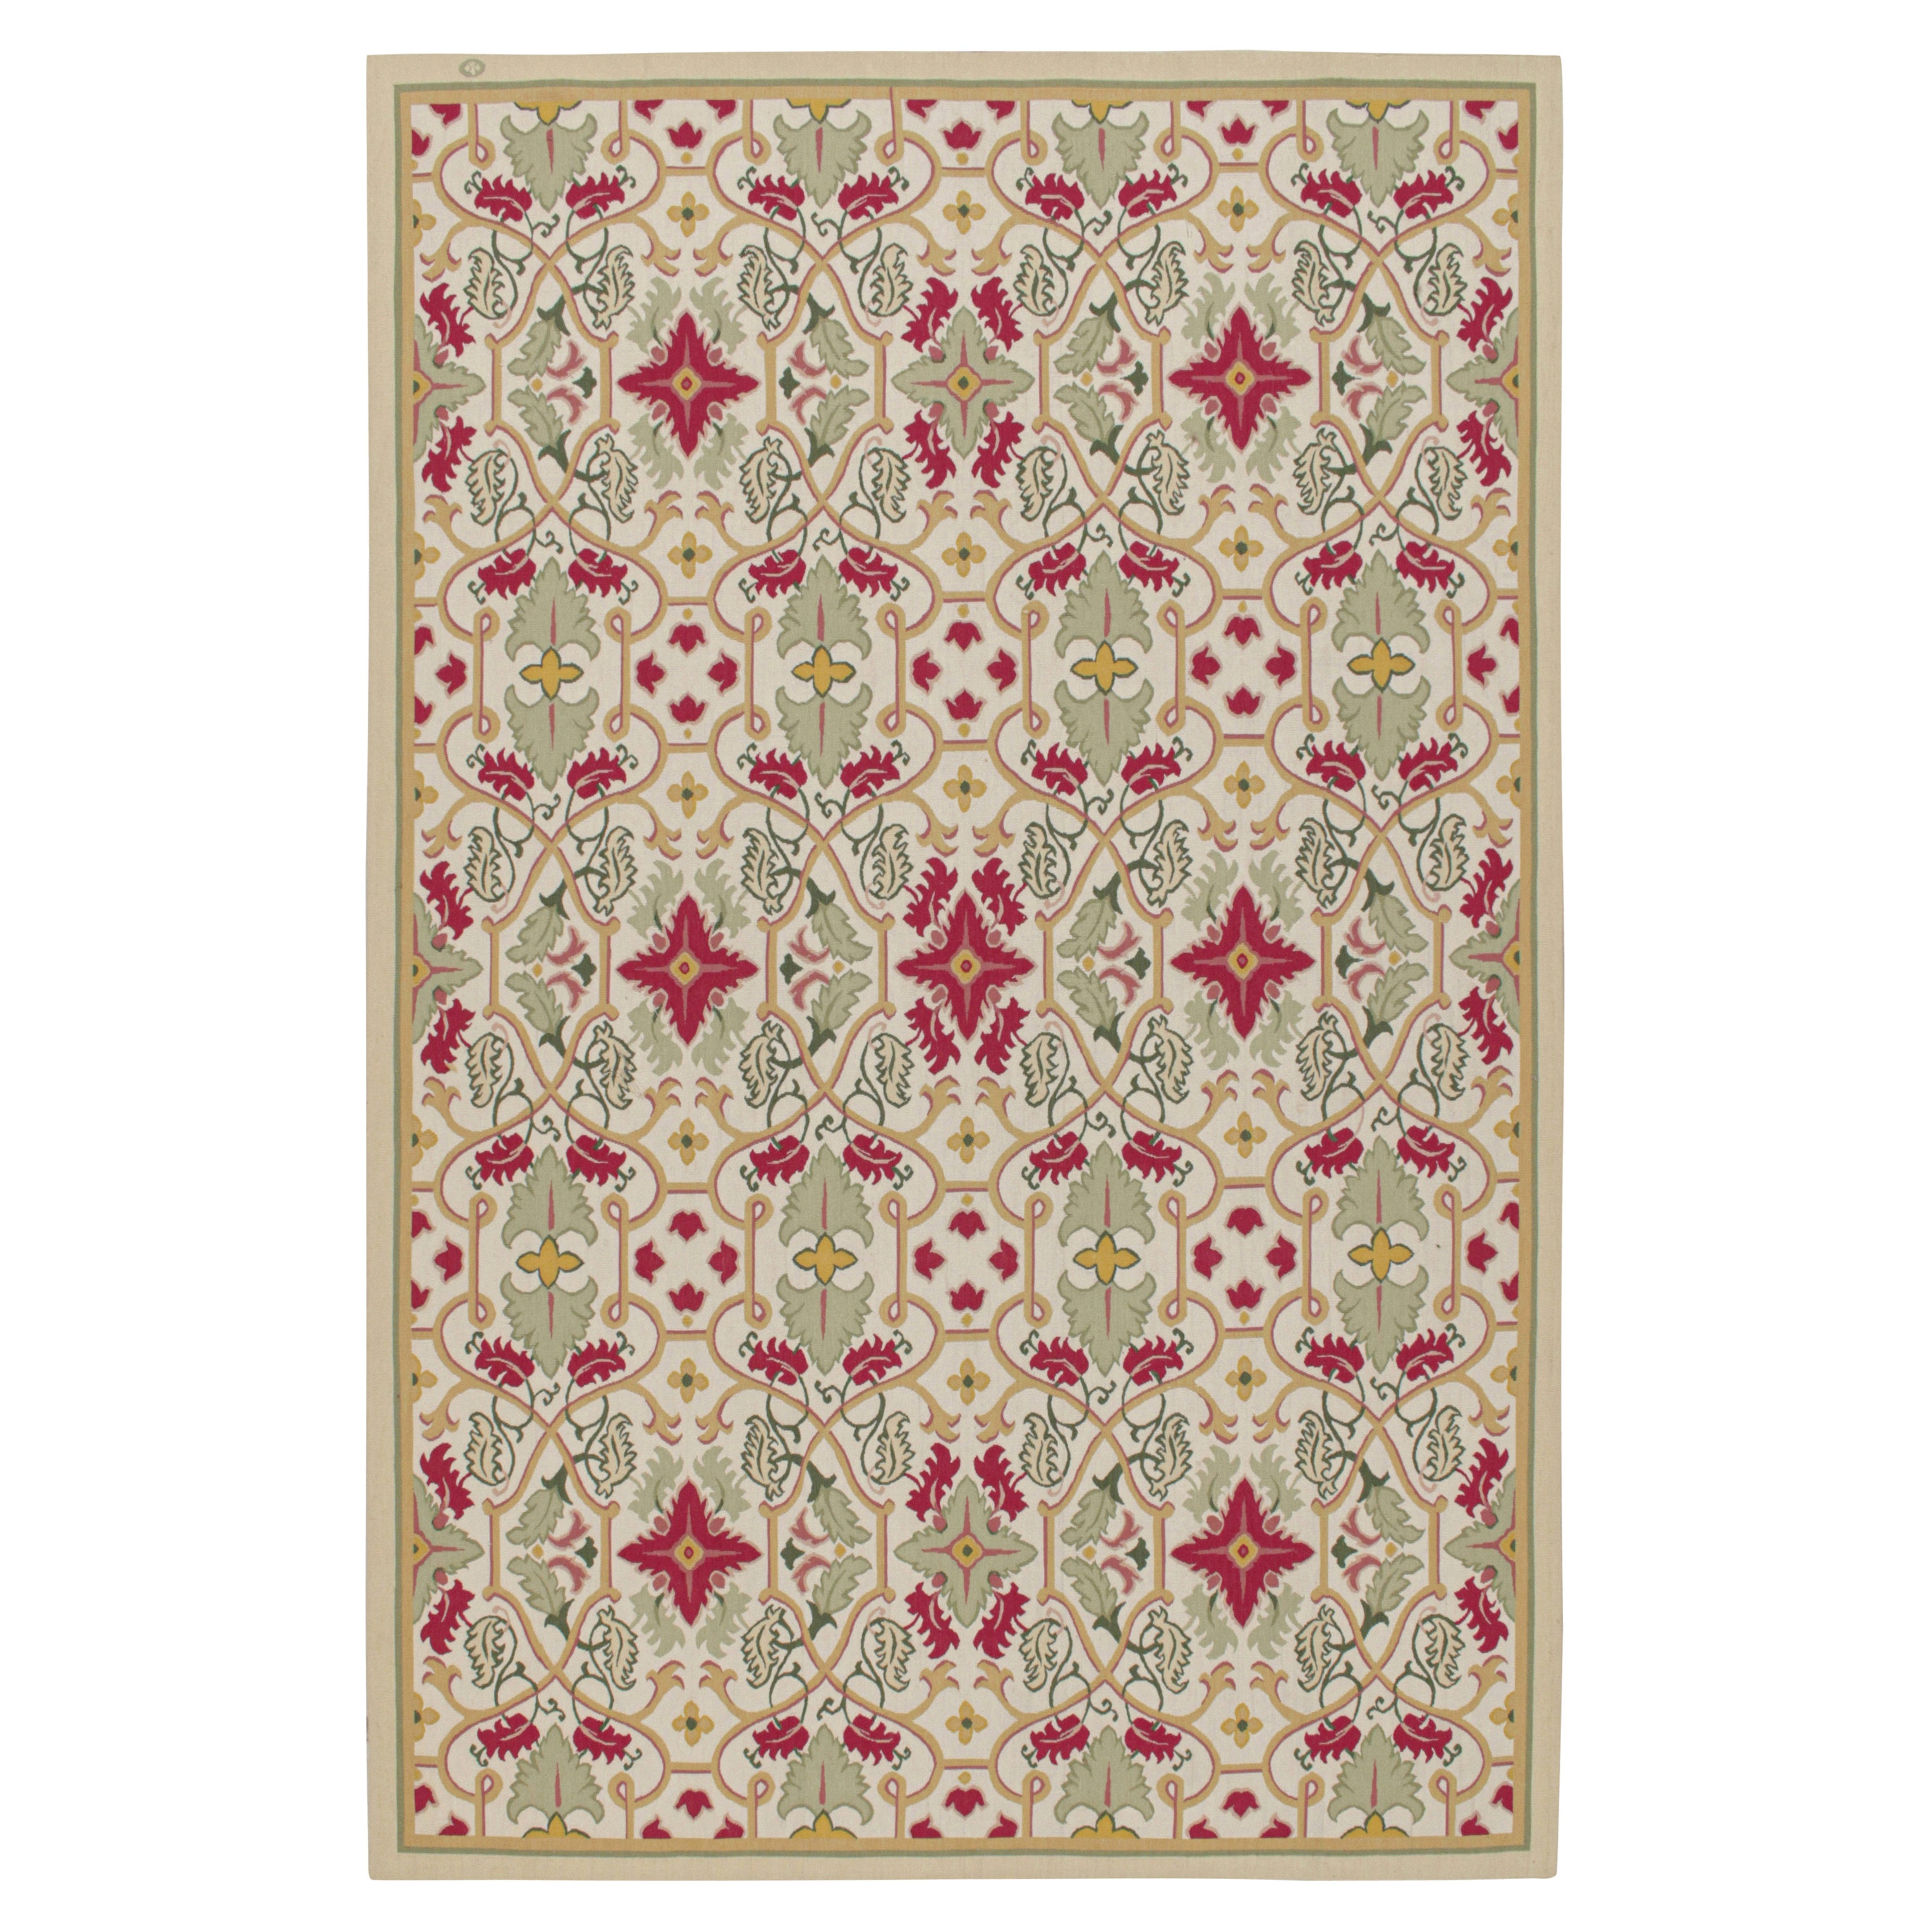 Aubusson Style Flatweave with Green and Red Floral Patterns For Sale